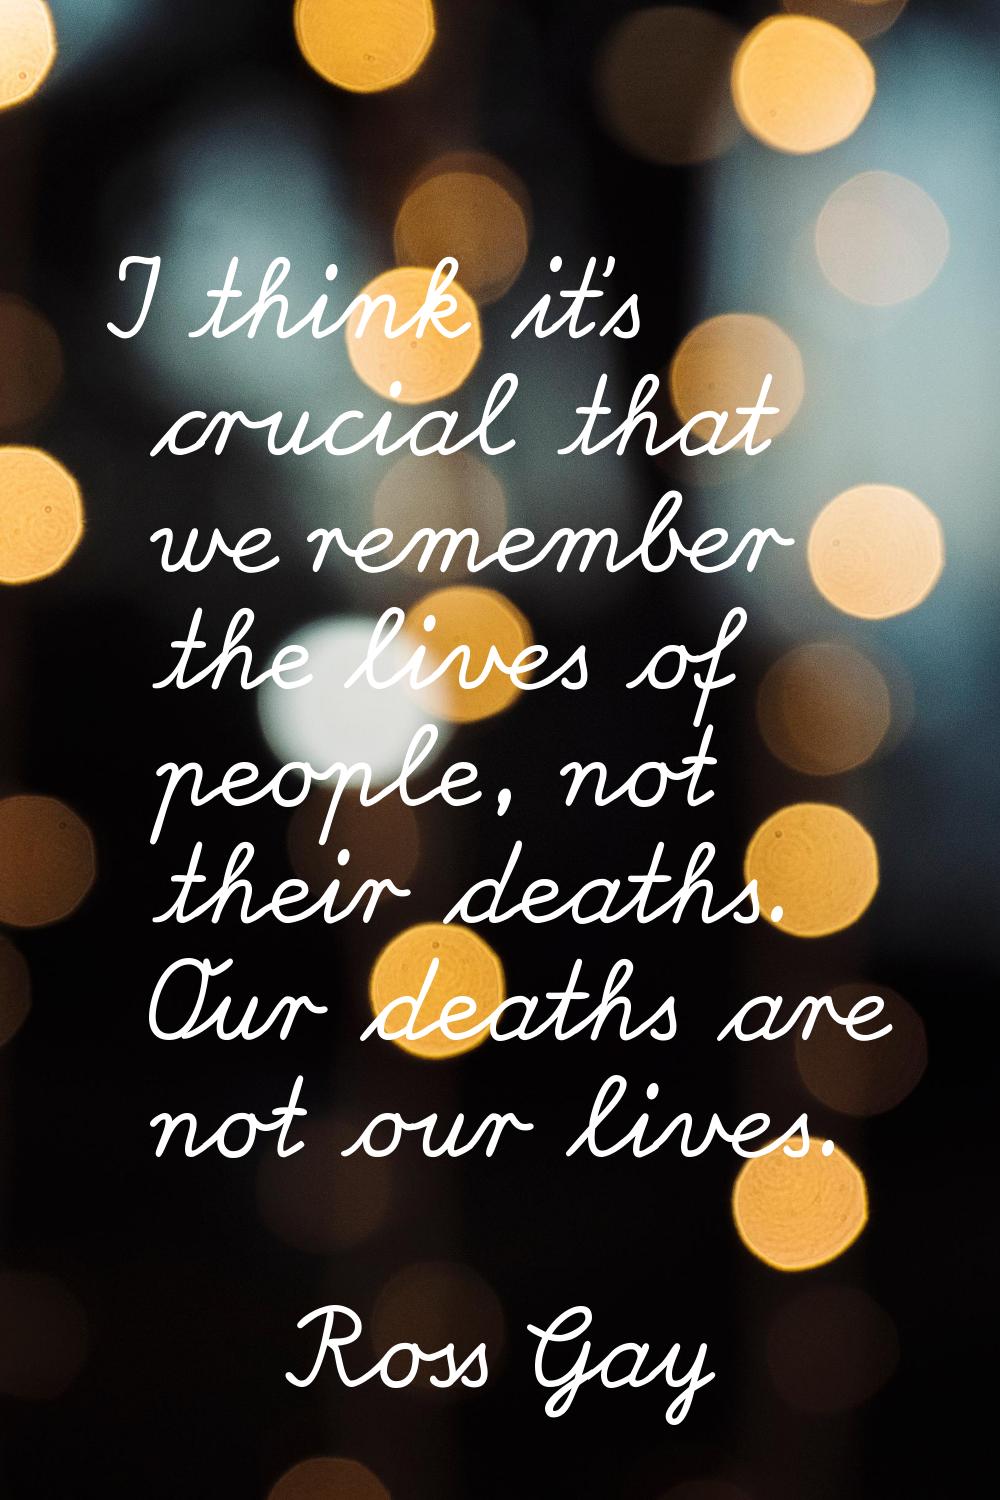 I think it's crucial that we remember the lives of people, not their deaths. Our deaths are not our